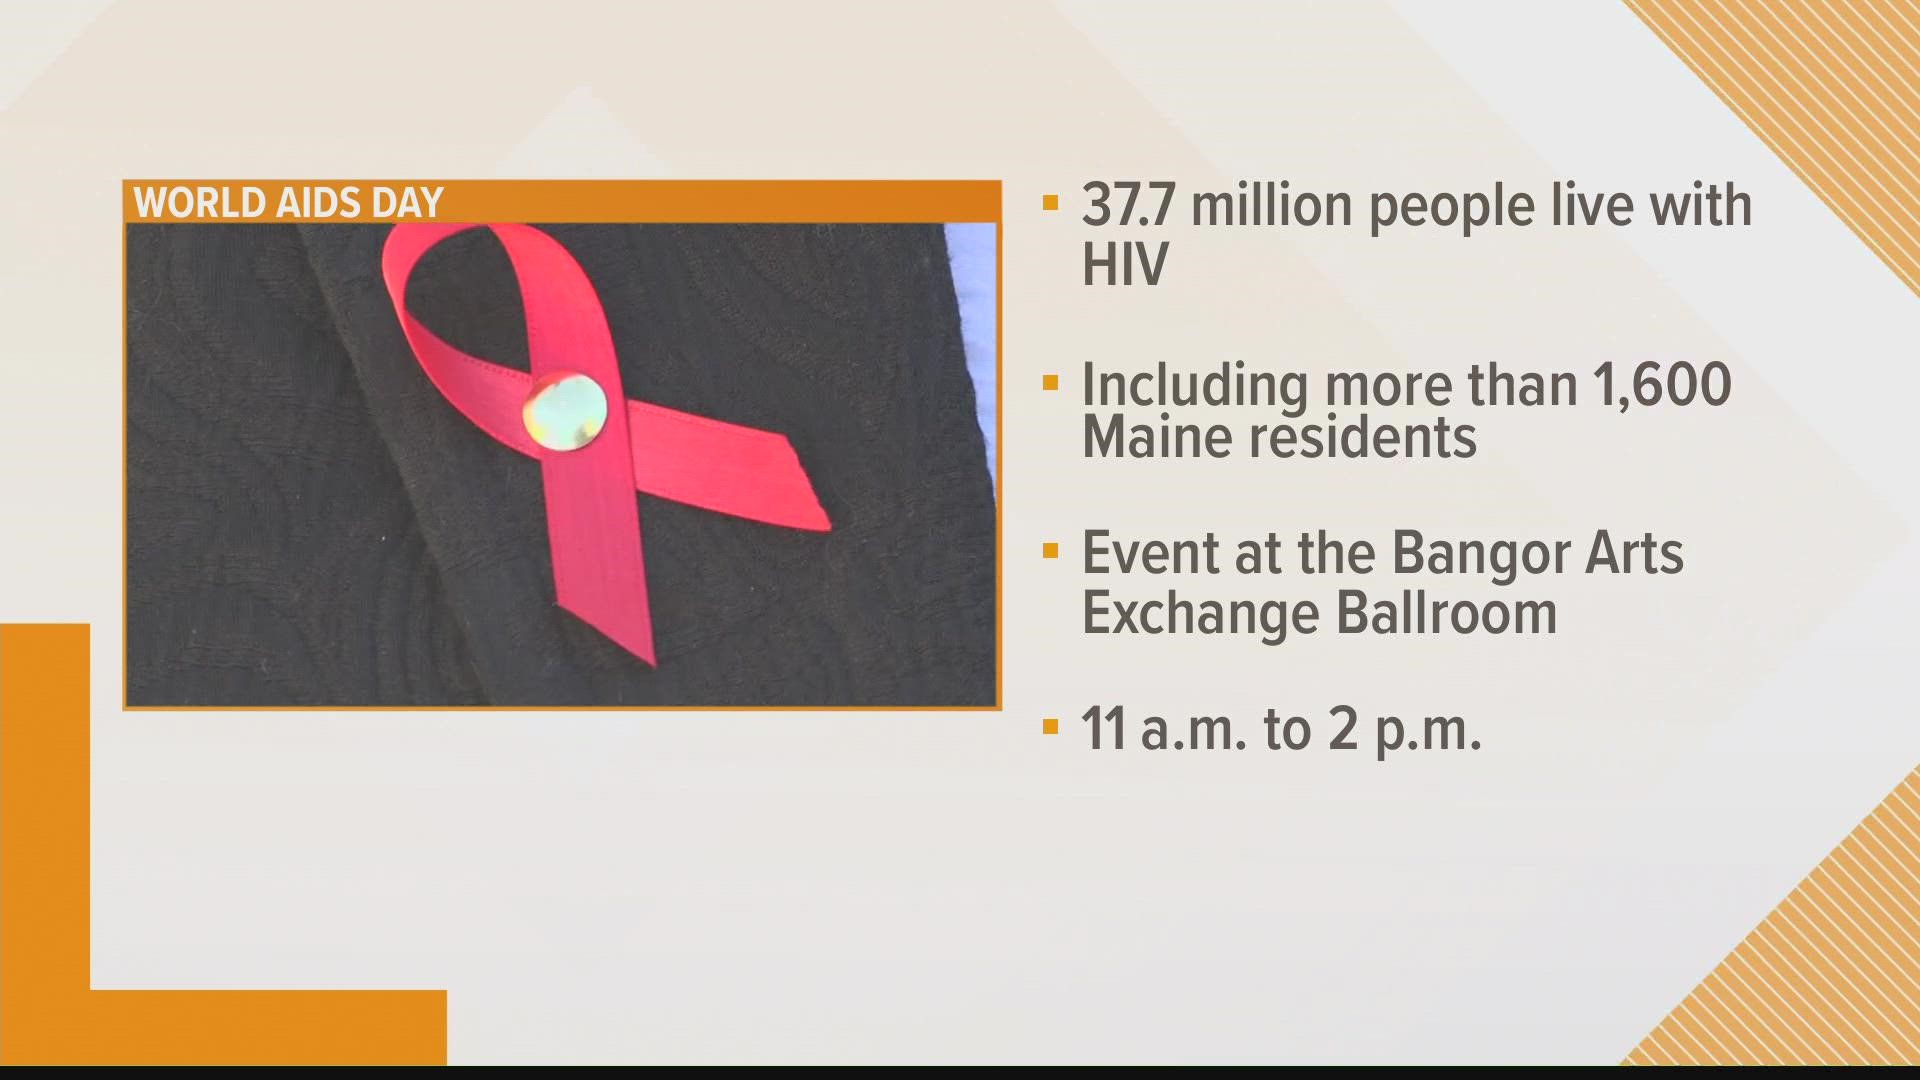 Health Equity Alliance in Bangor and the Frannie Peabody Center in Portland will each hold public events to commemorate World AIDS Day